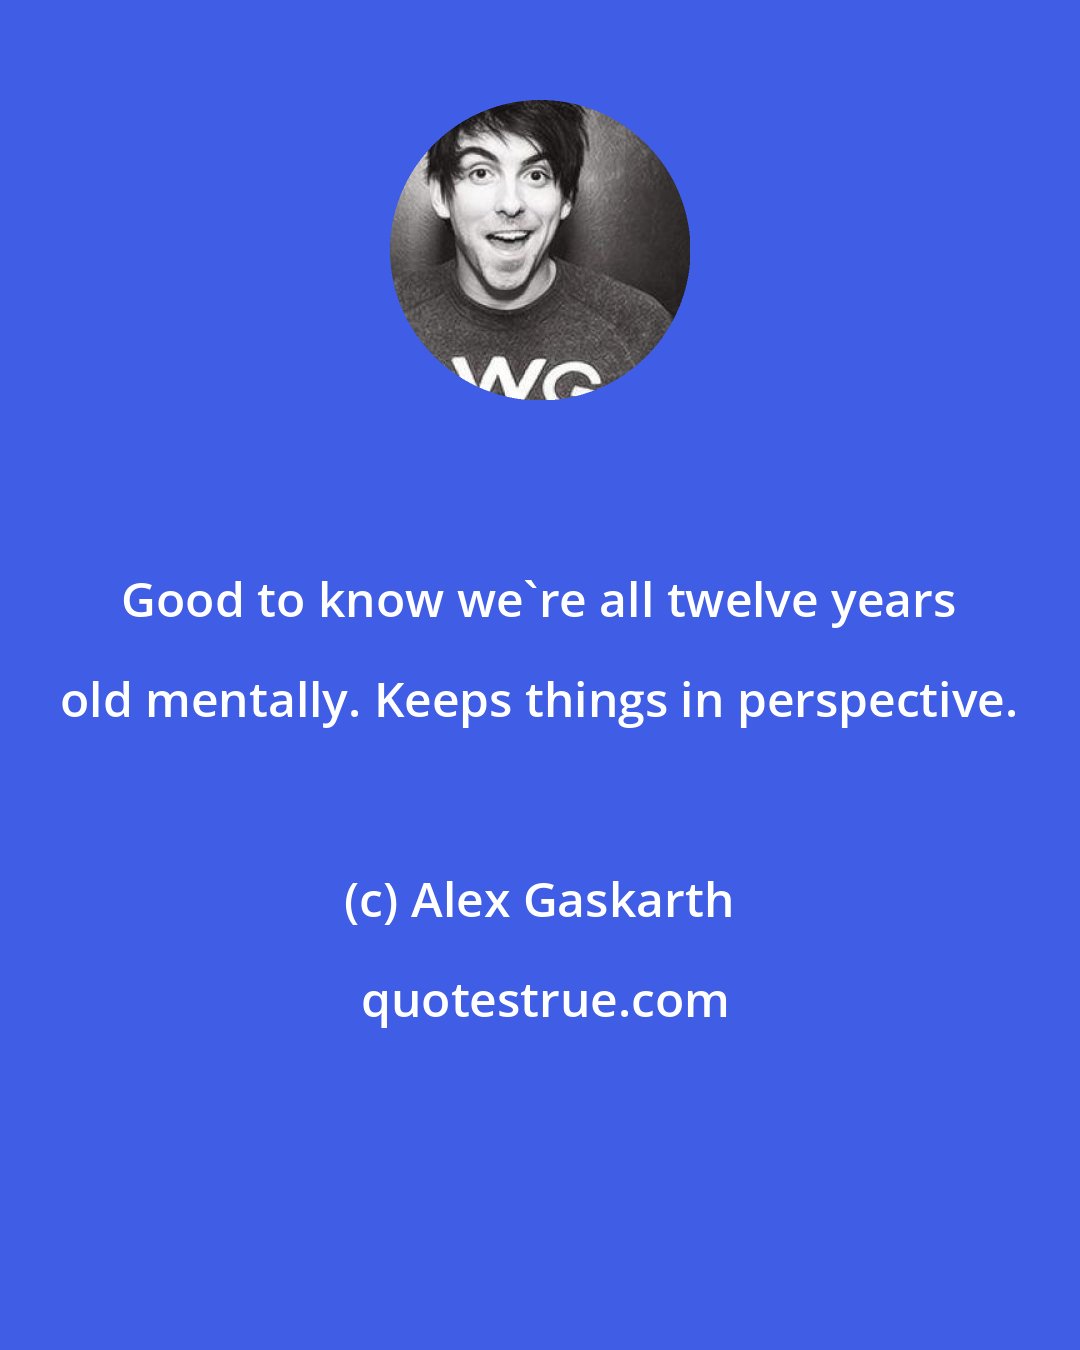 Alex Gaskarth: Good to know we're all twelve years old mentally. Keeps things in perspective.